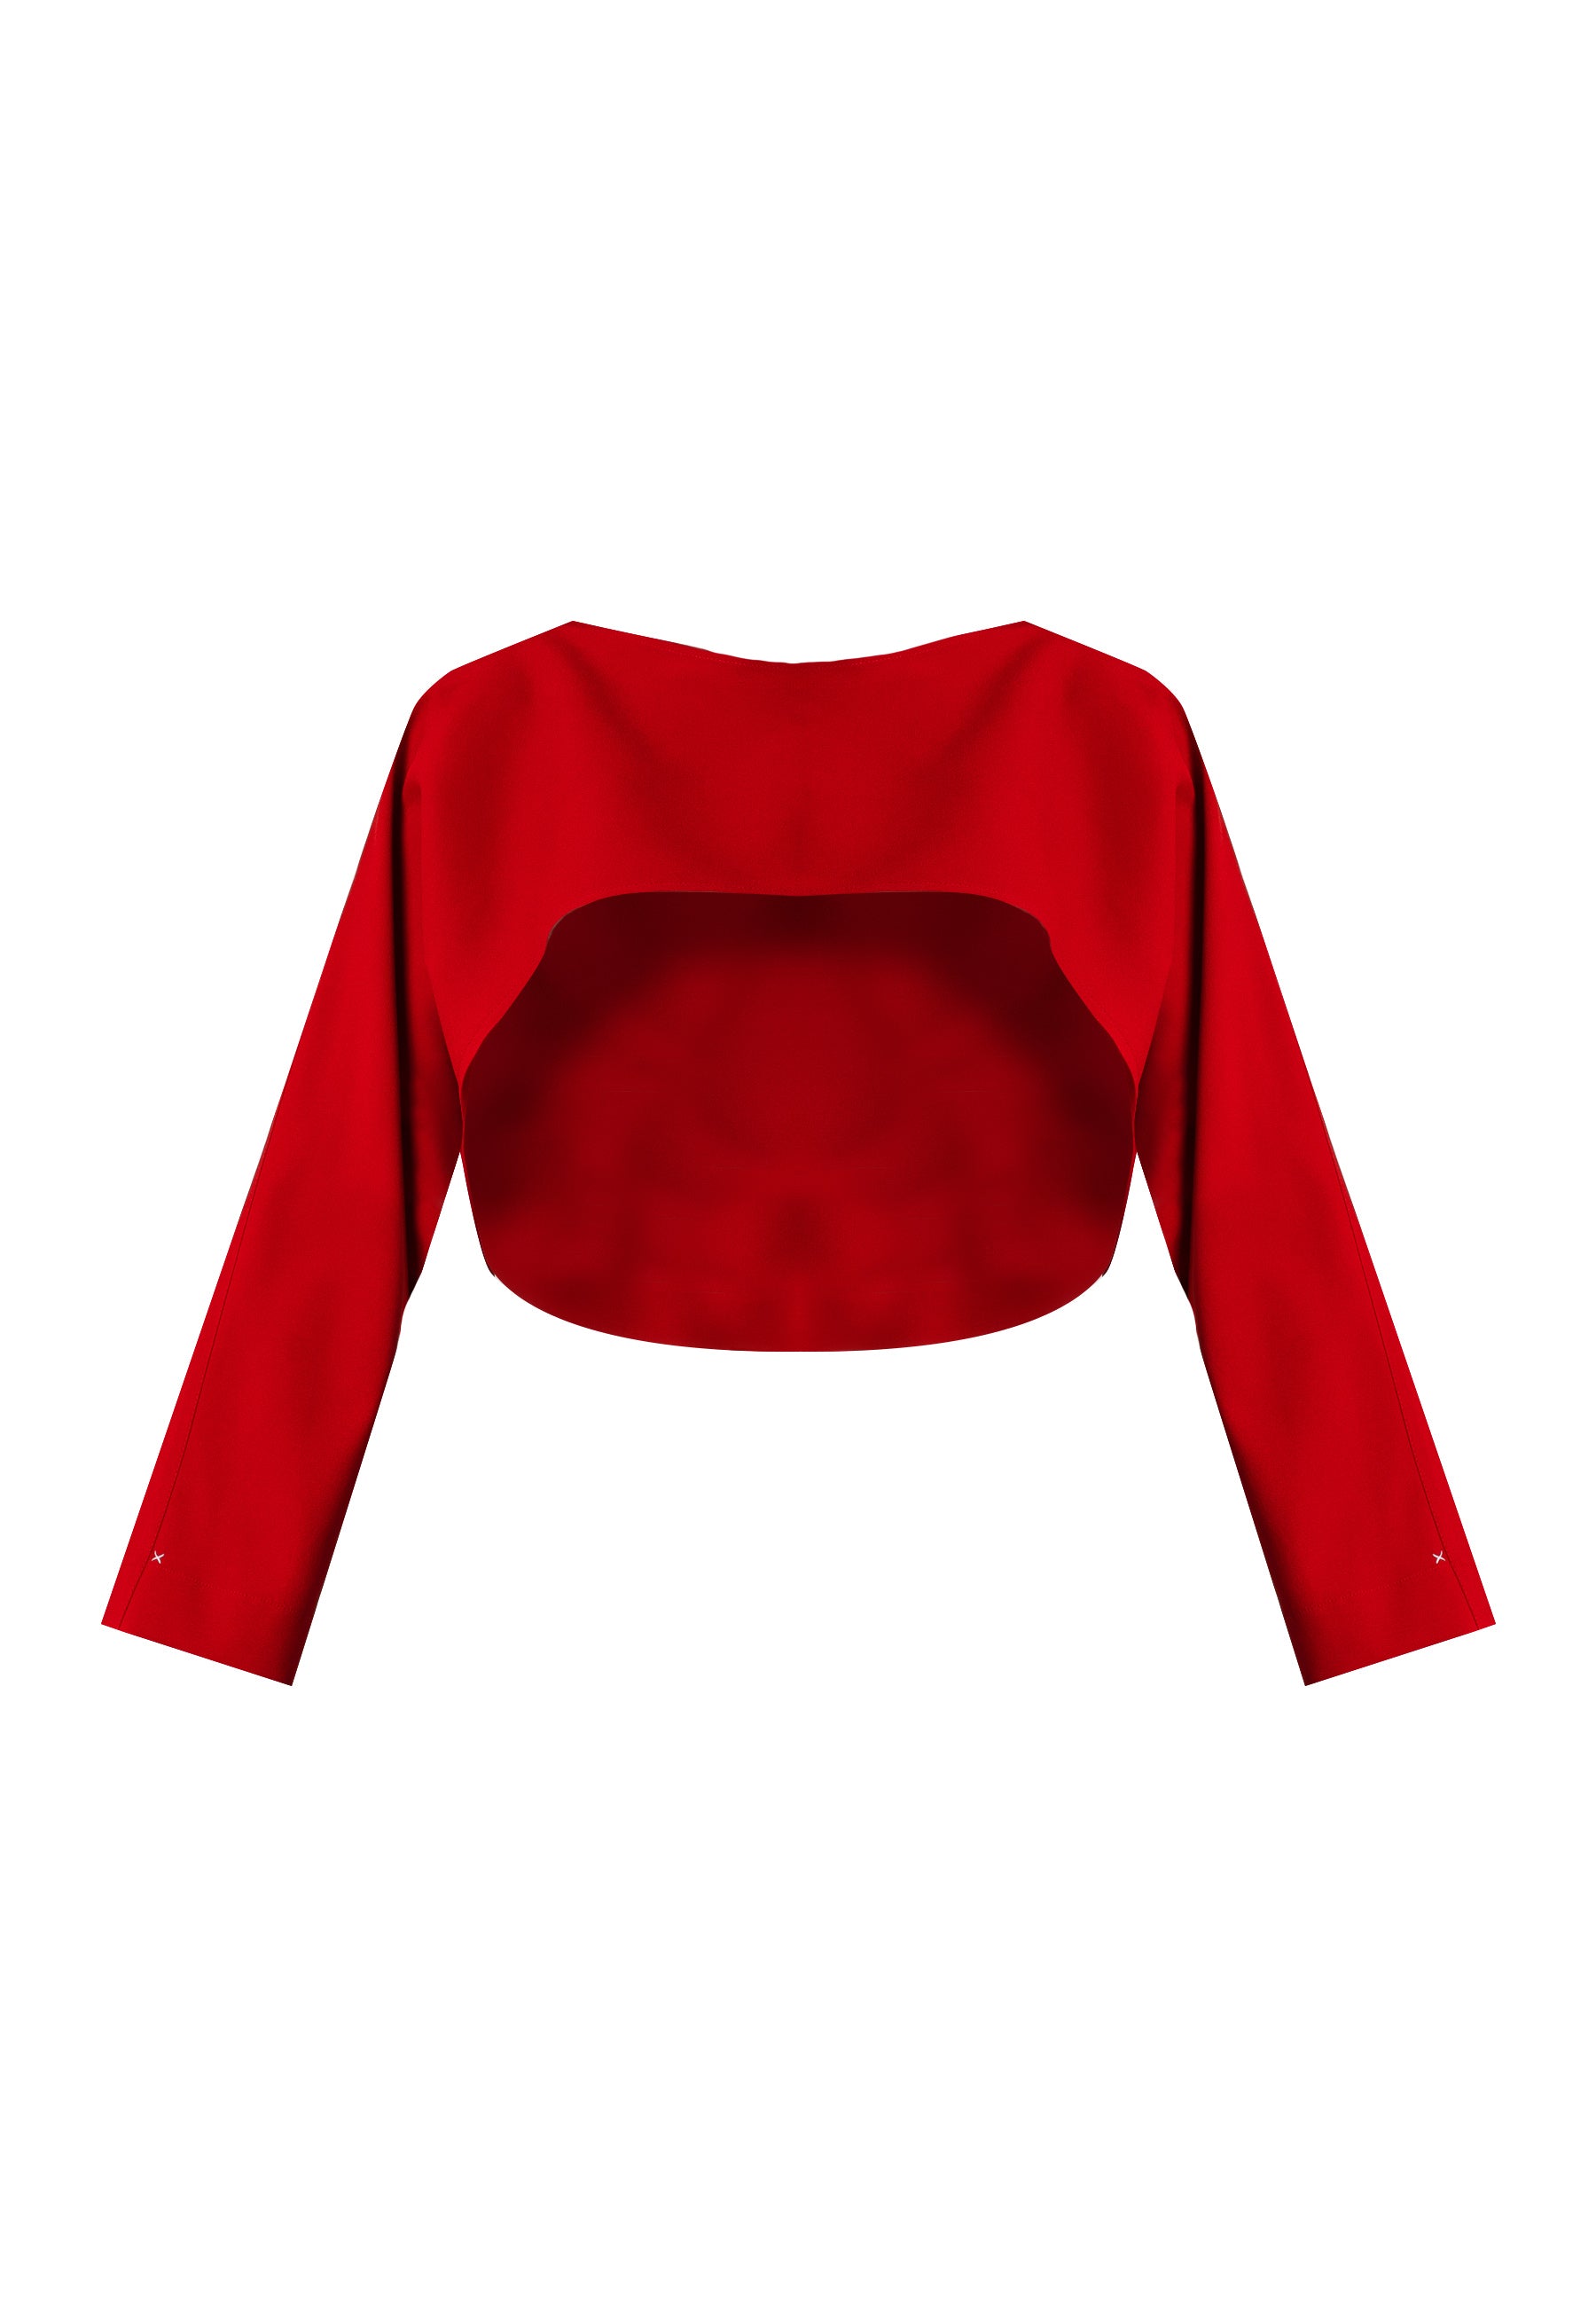 shawl for dress Red shawl  shawl for dress women shawl  Fashion shawl  red women shawl  red shawl for dress shawls and wraps for evening dresses shawl for red dress red shawls for evening dresses office wear  made in italy clothing